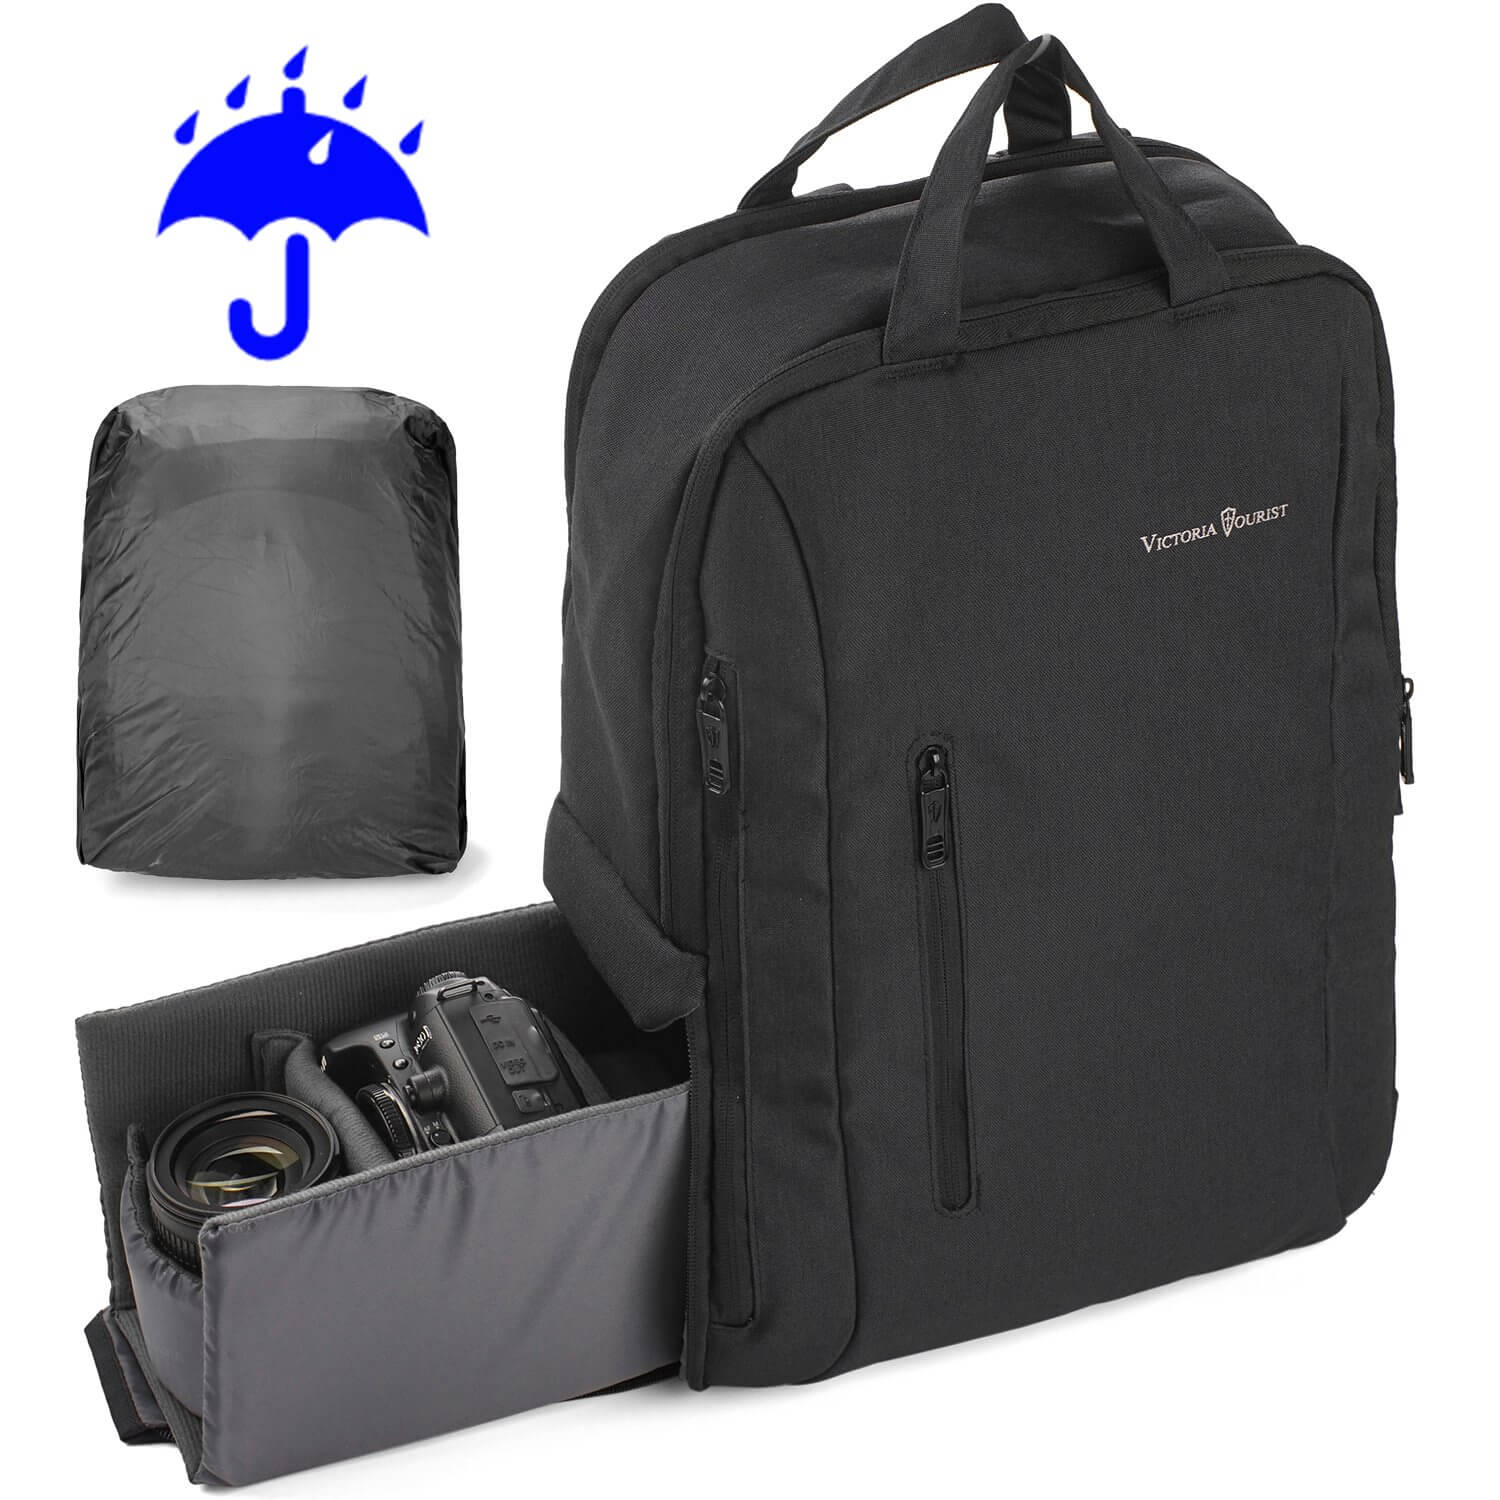 camera bag with laptop compartment